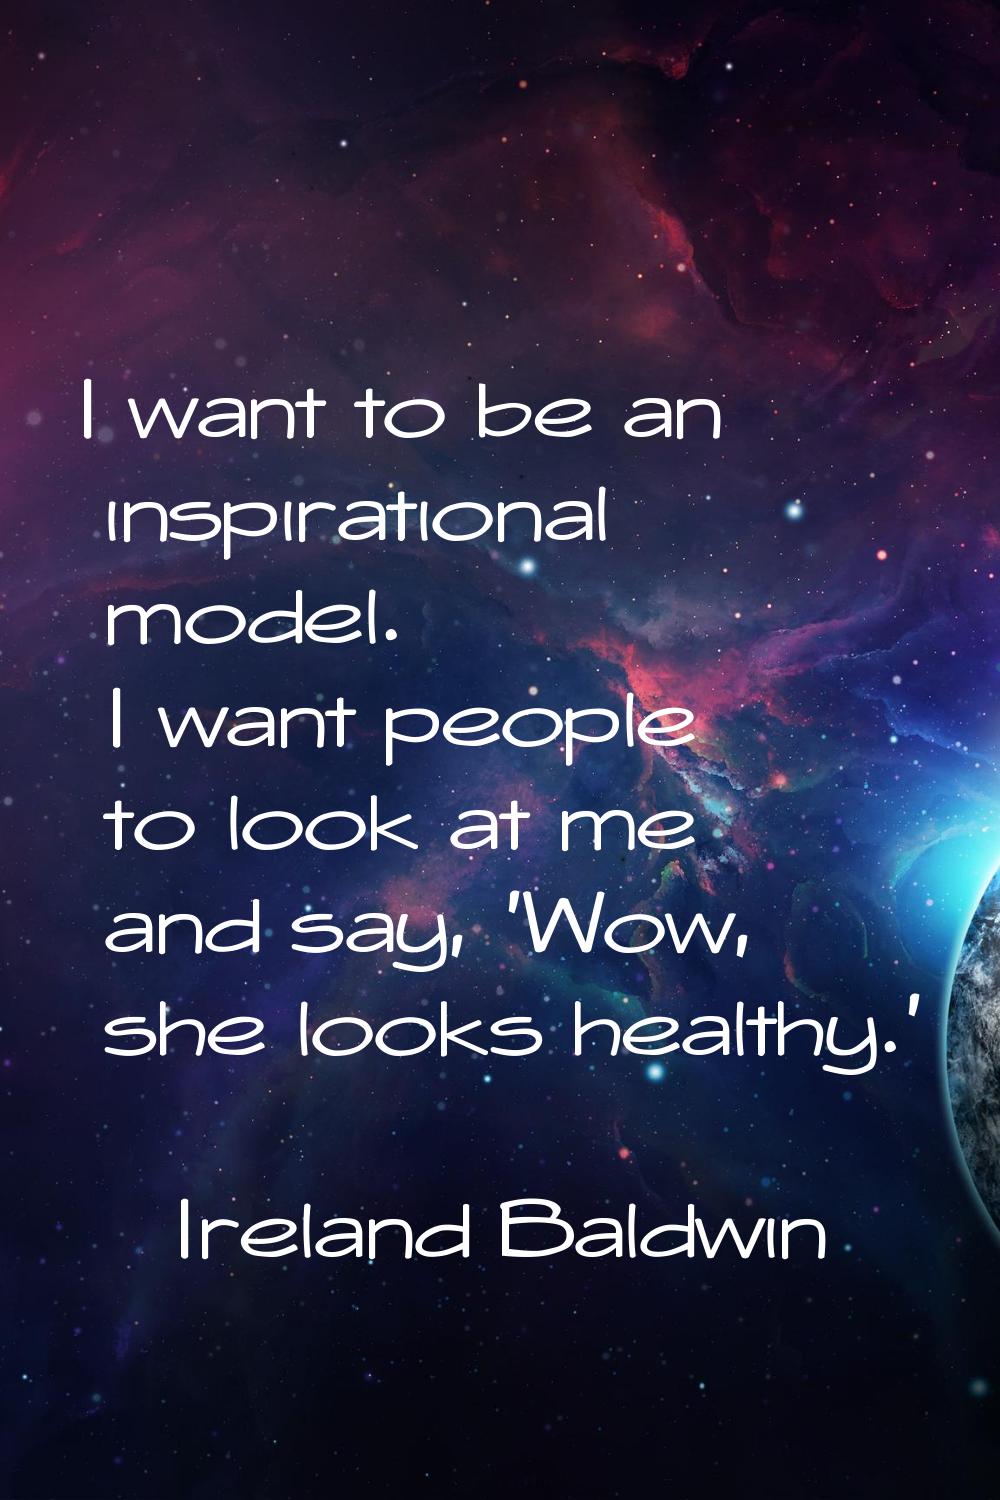 I want to be an inspirational model. I want people to look at me and say, 'Wow, she looks healthy.'